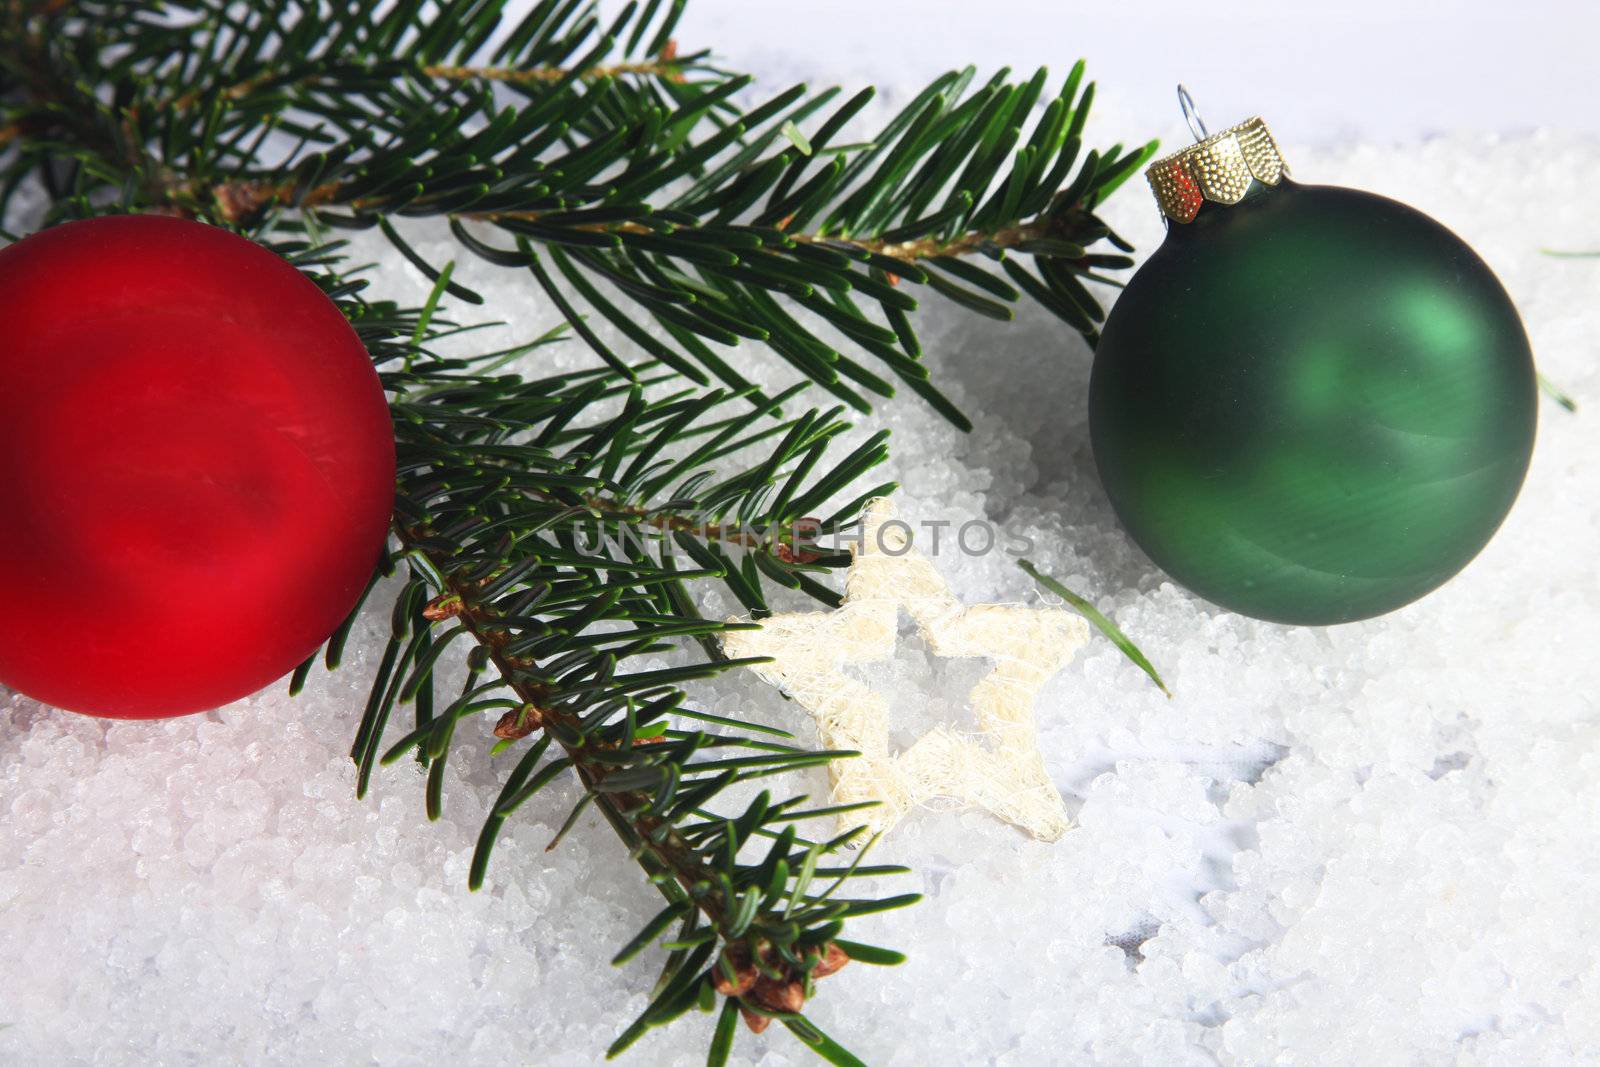 Pine needles and baubles by Farina6000